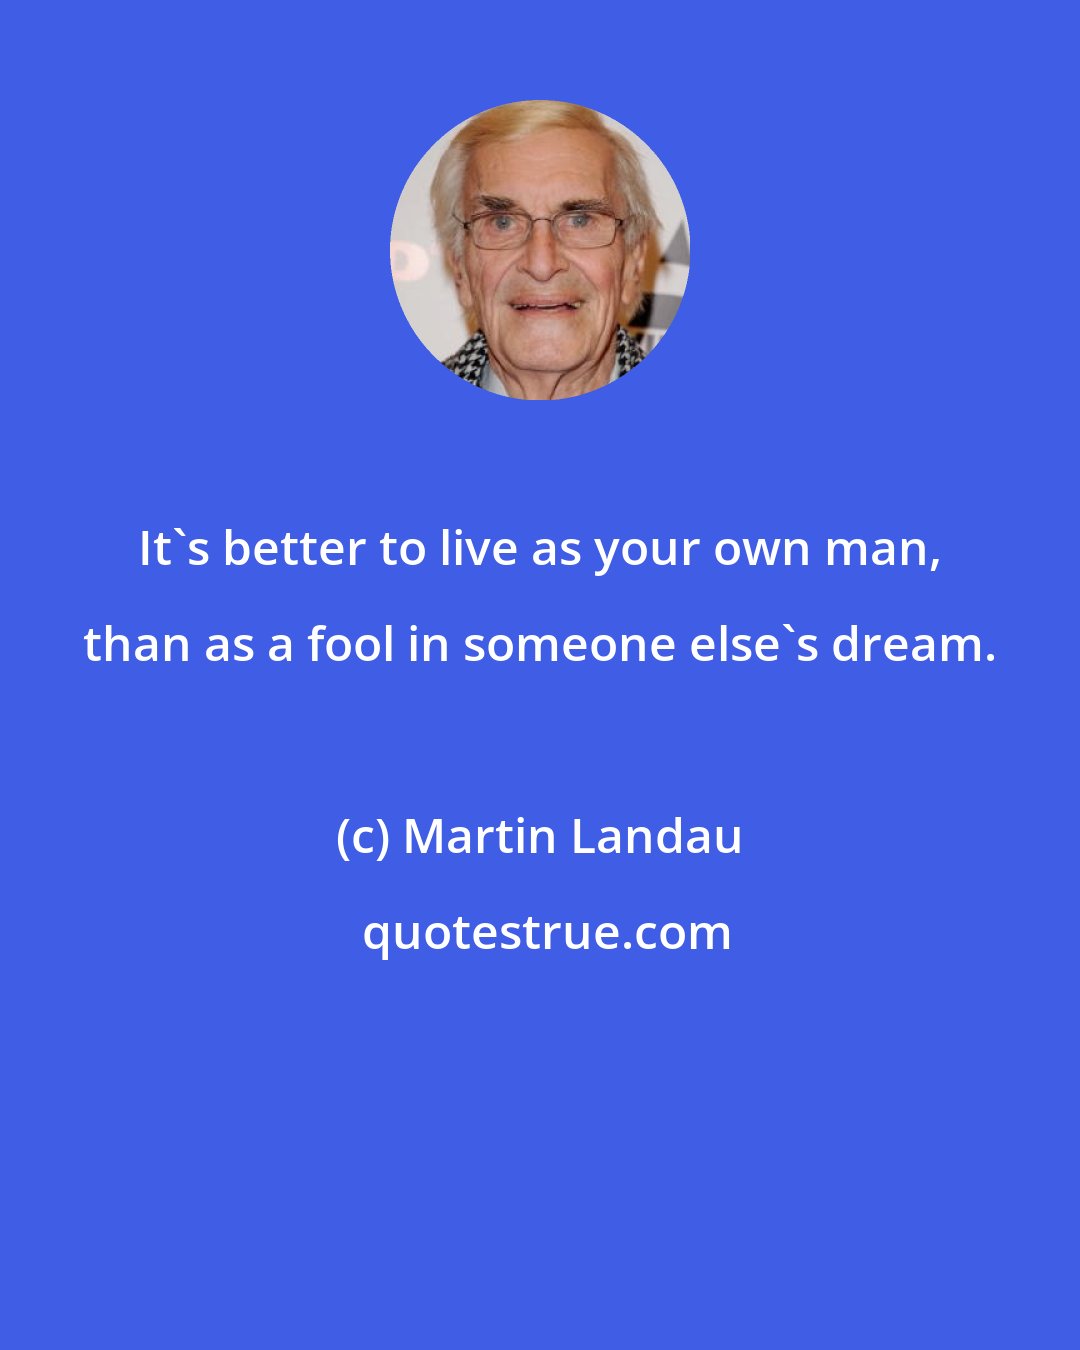 Martin Landau: It's better to live as your own man, than as a fool in someone else's dream.